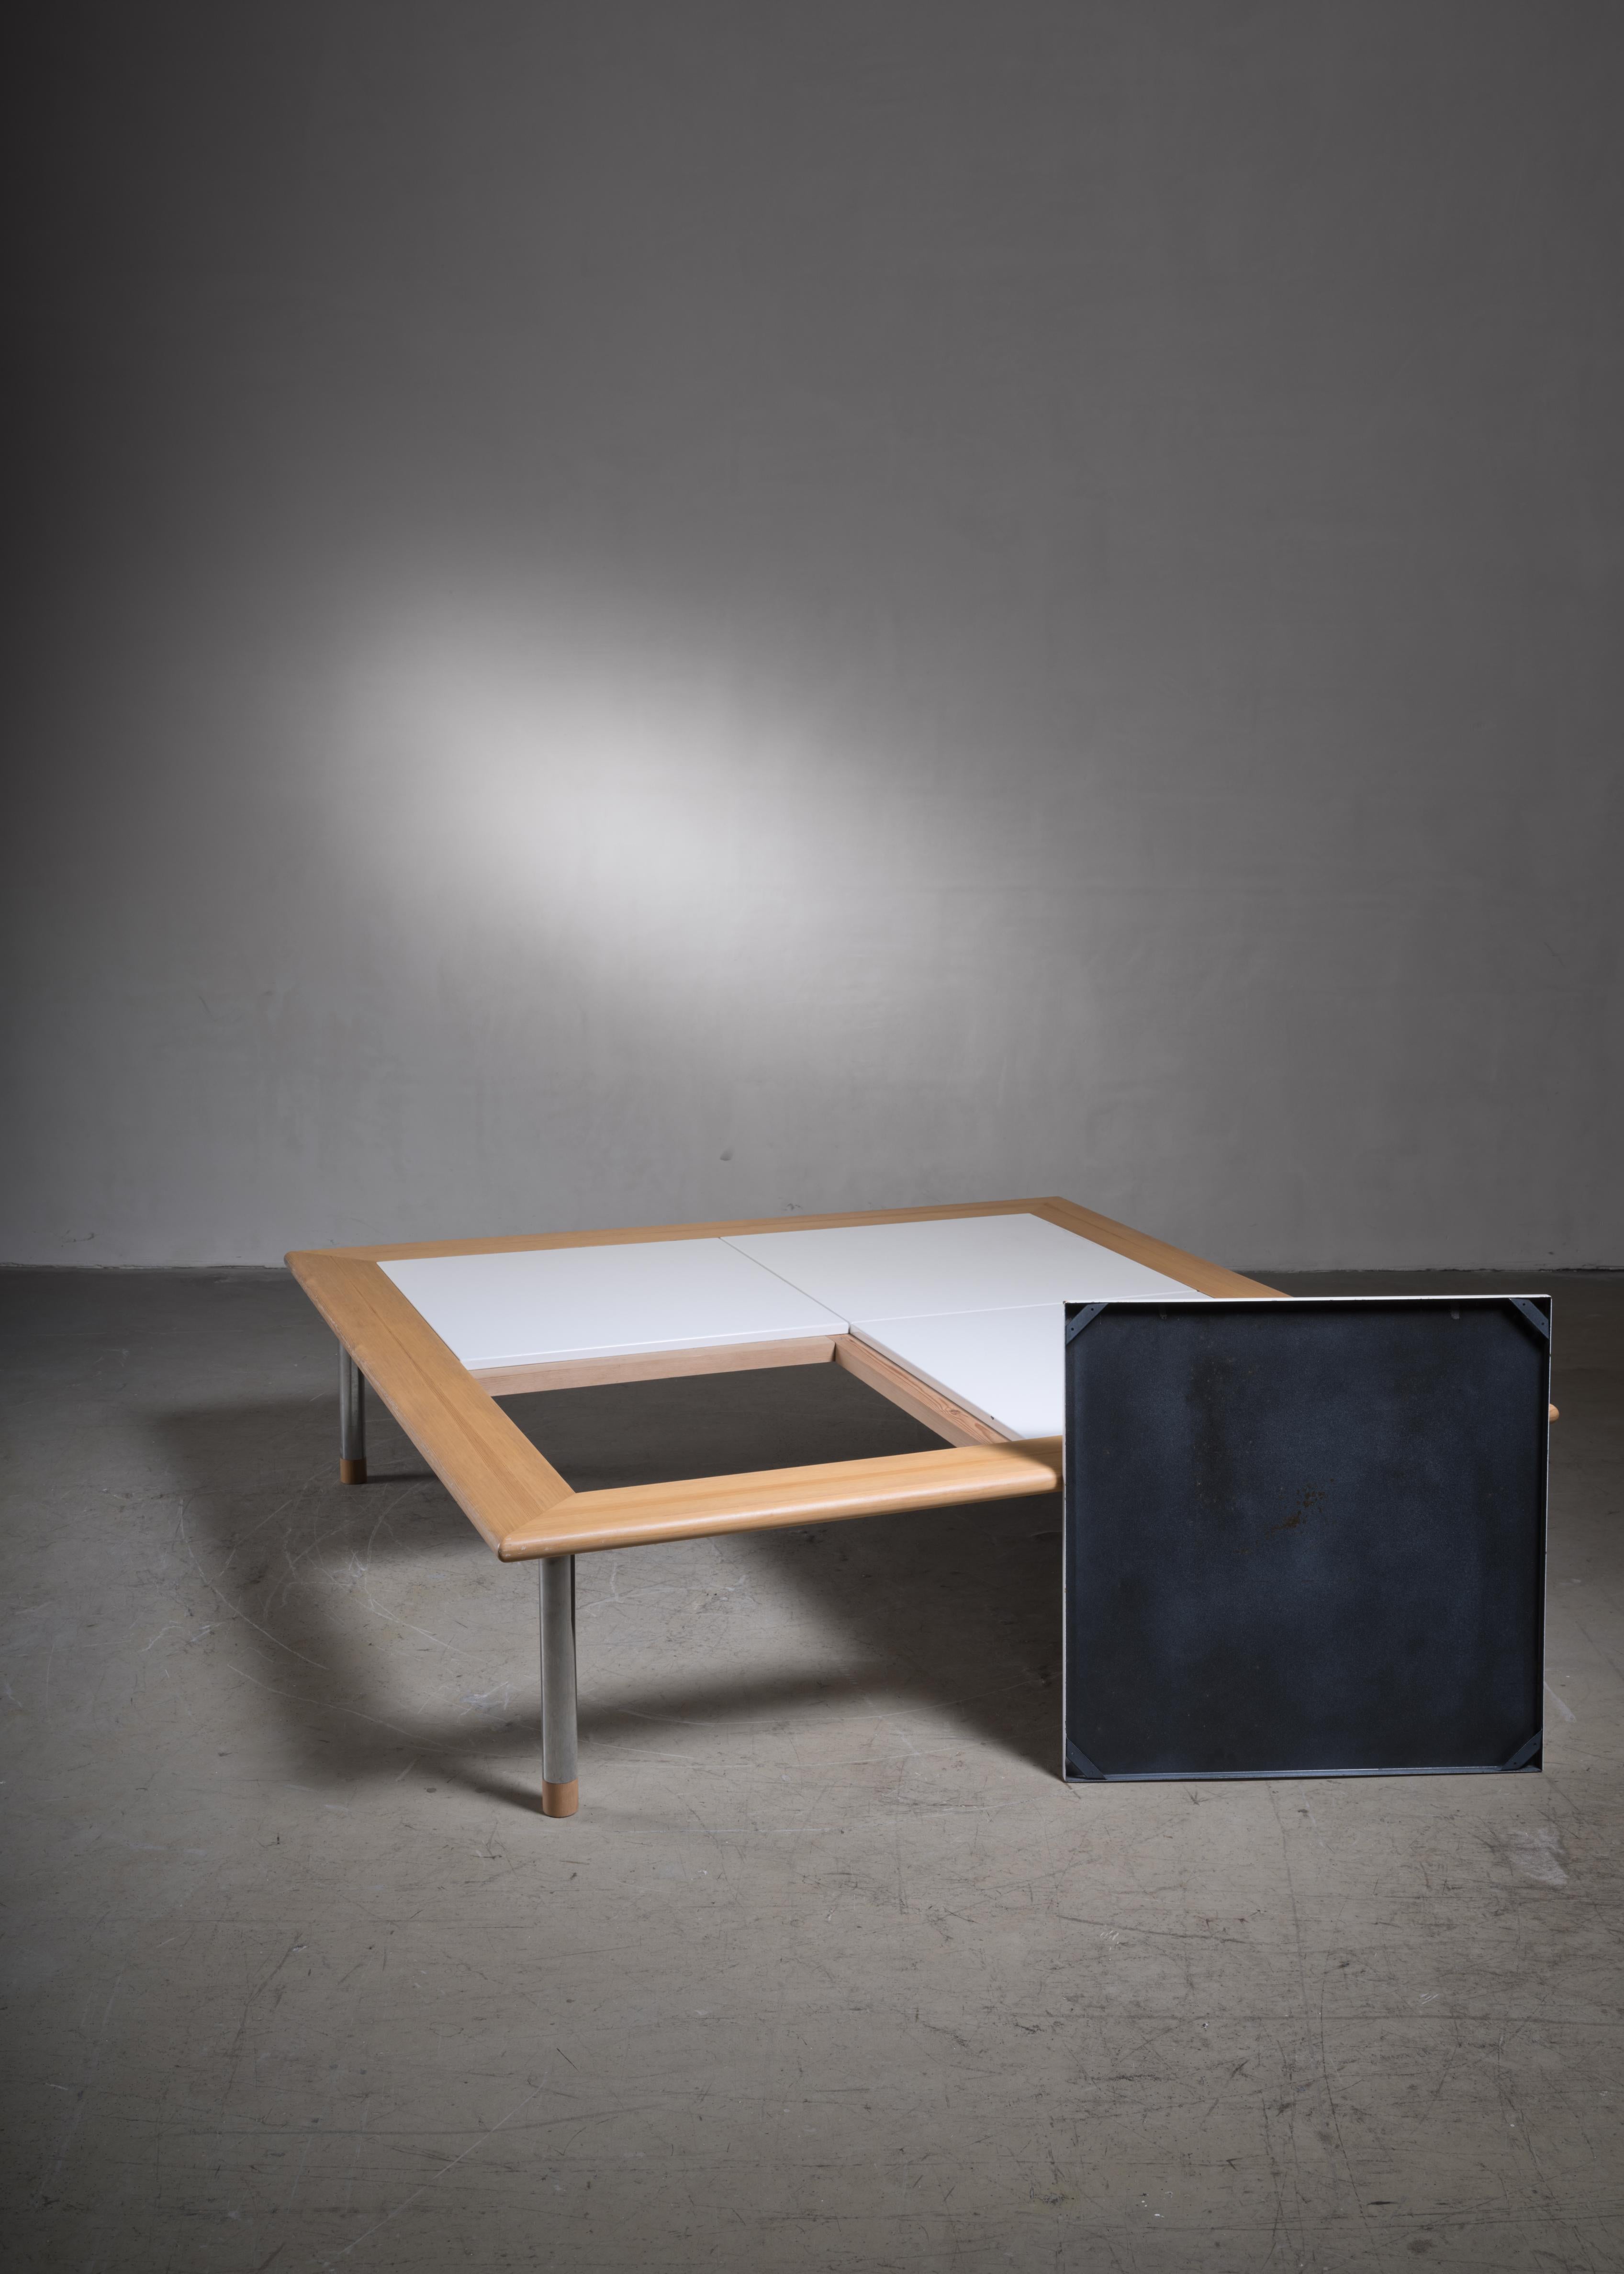 A rare, square coffee table, designed in 1980 for Vuokko by Antti Nurmesniemi. The table is made of four white enameled metal plates, framed in lacquered pine wood, resting on chrome legs.

Also available in smaller size with 2 enameled metal